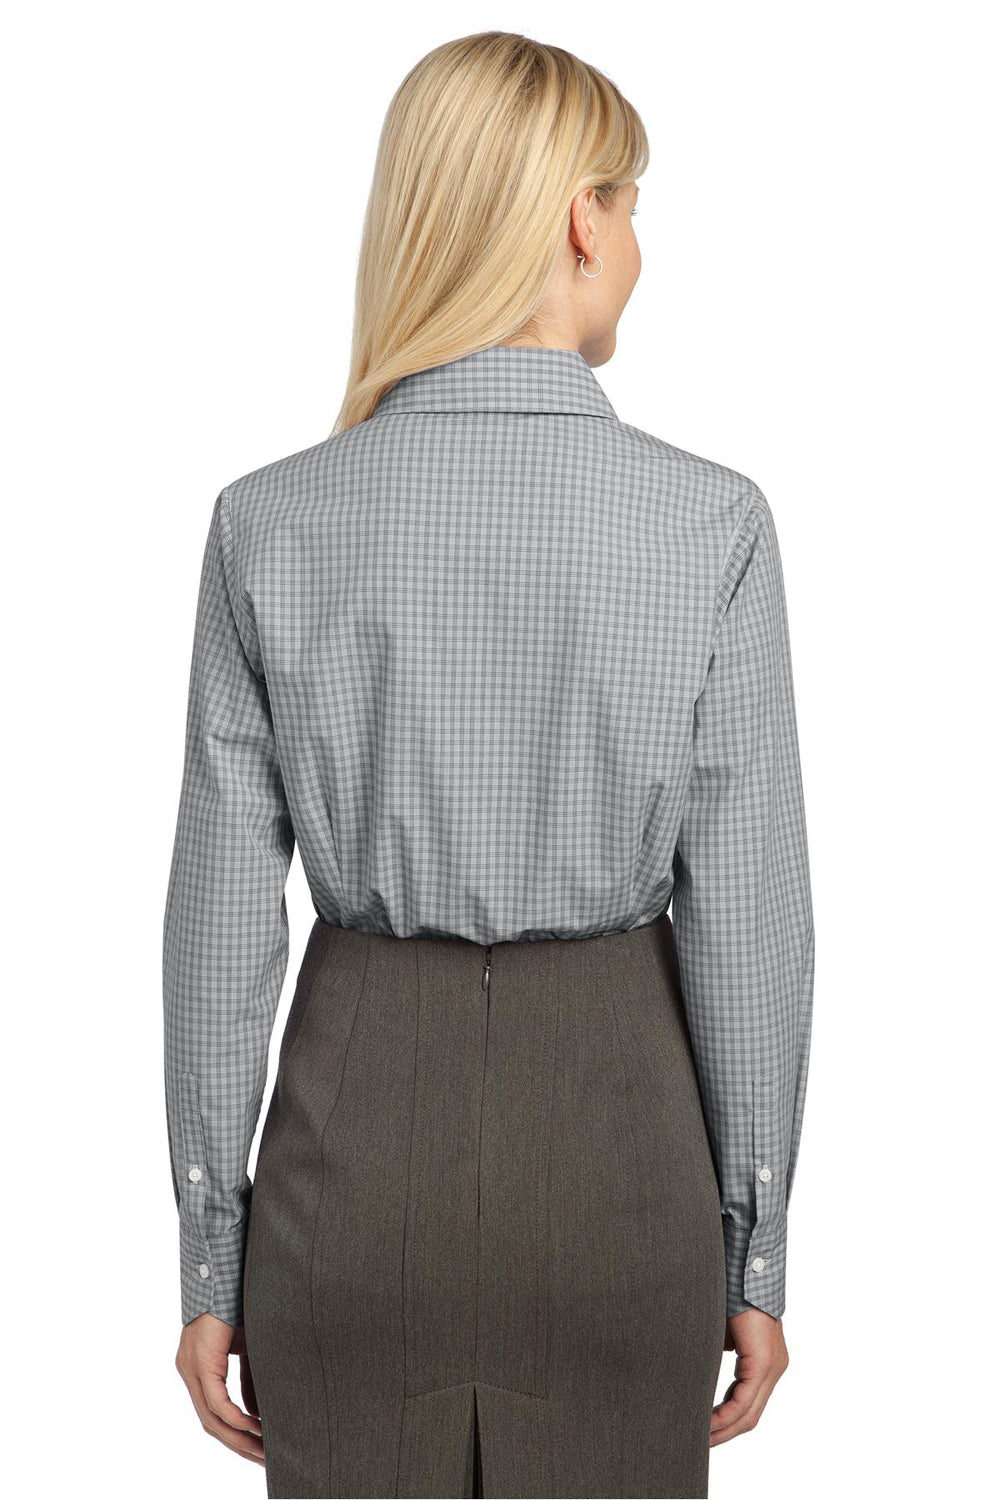 Port Authority L639 Womens Easy Care Wrinkle Resistant Long Sleeve Button Down Shirt Charcoal Grey Back